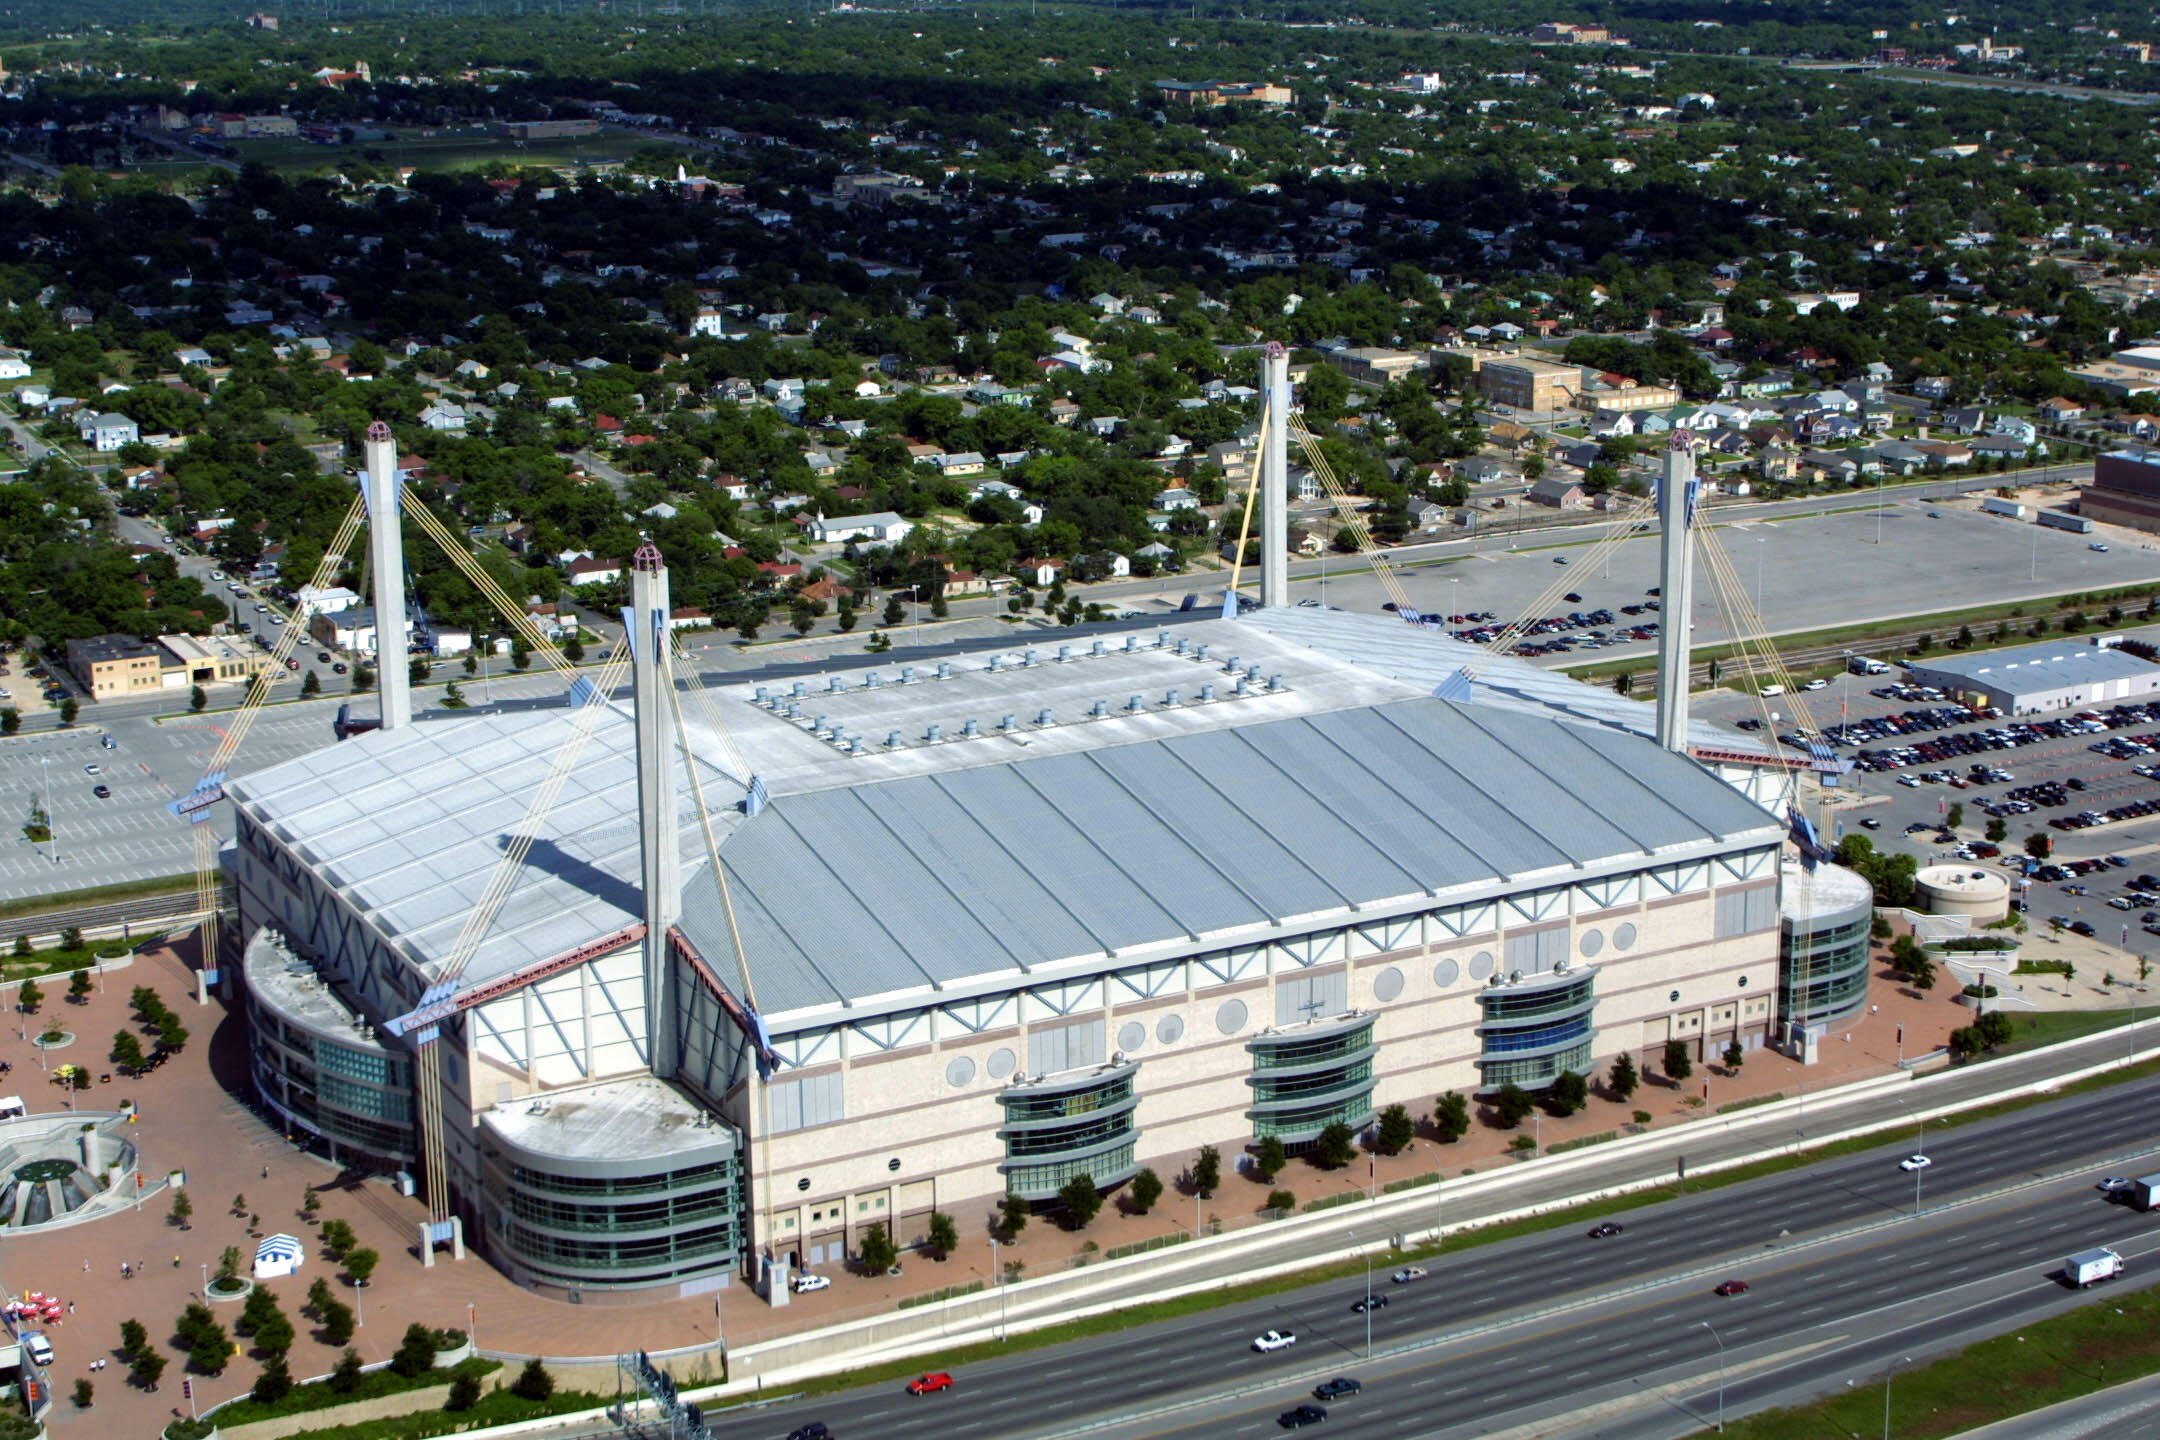 Tickets For Spurs Return To Alamodome Go On Sale | iHeart